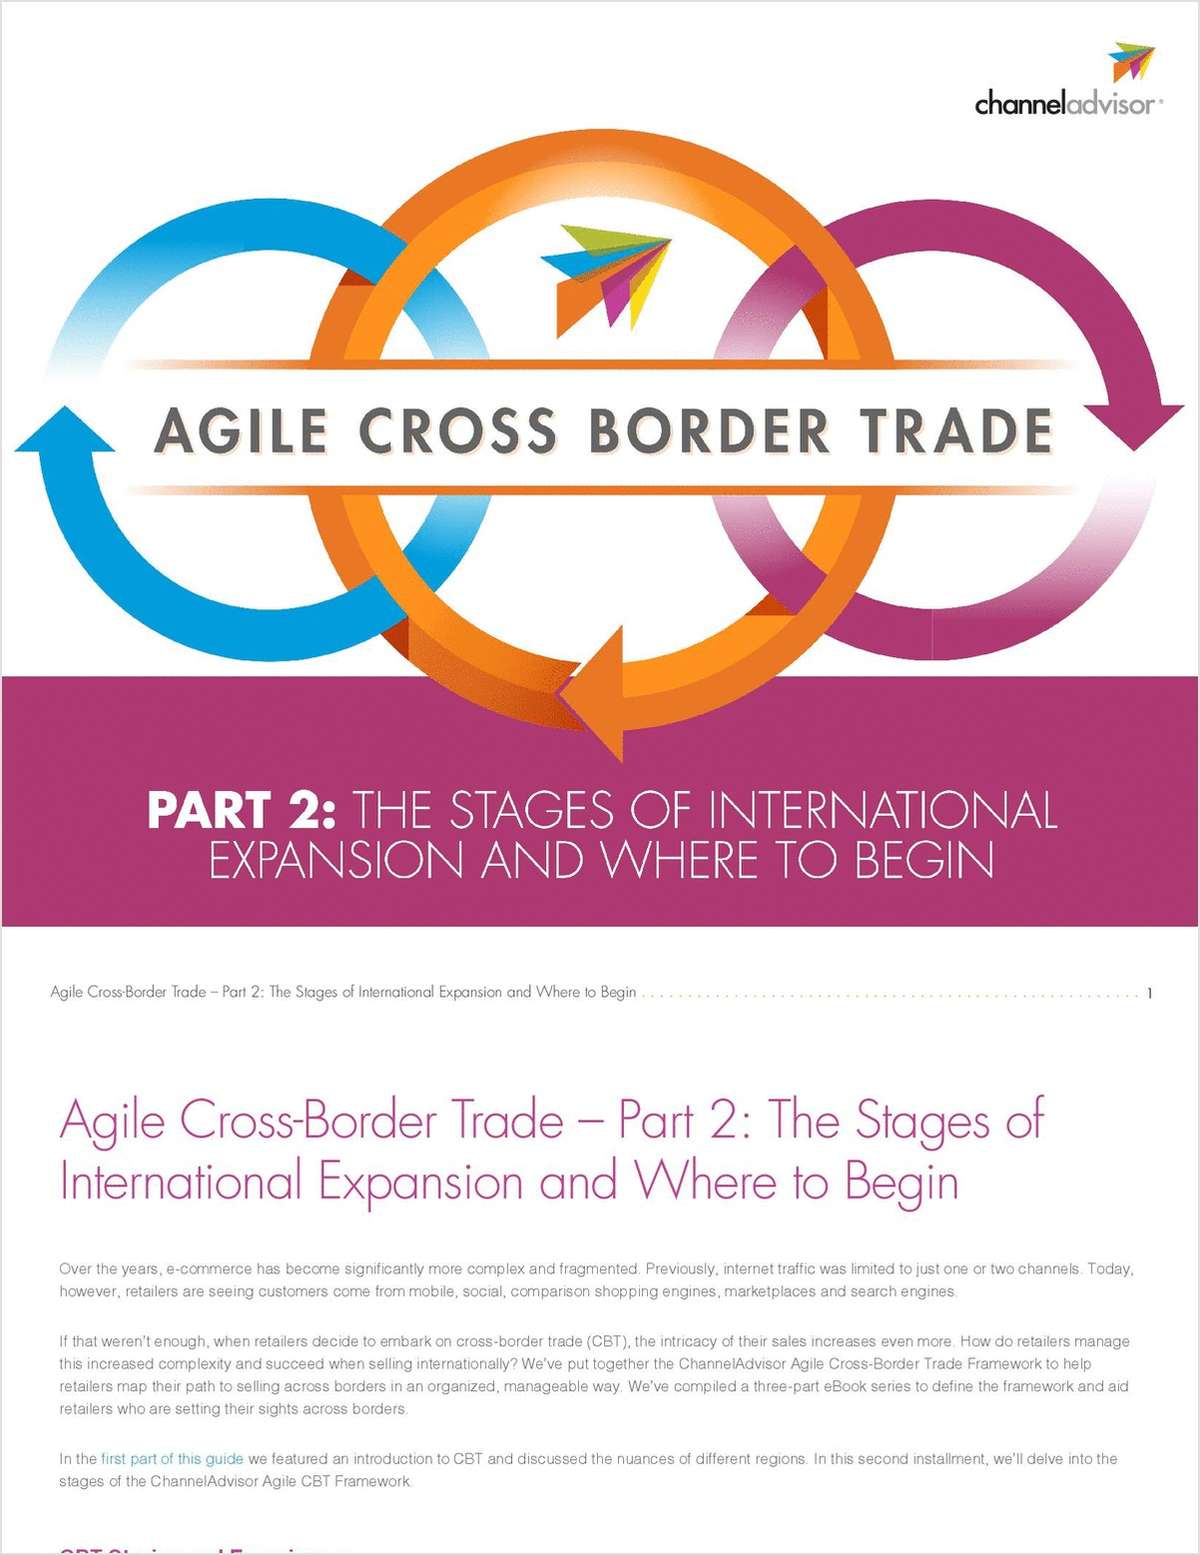 Agile Cross-Border Trade - Part 2: The Stages of International Expansion and Where to Begin